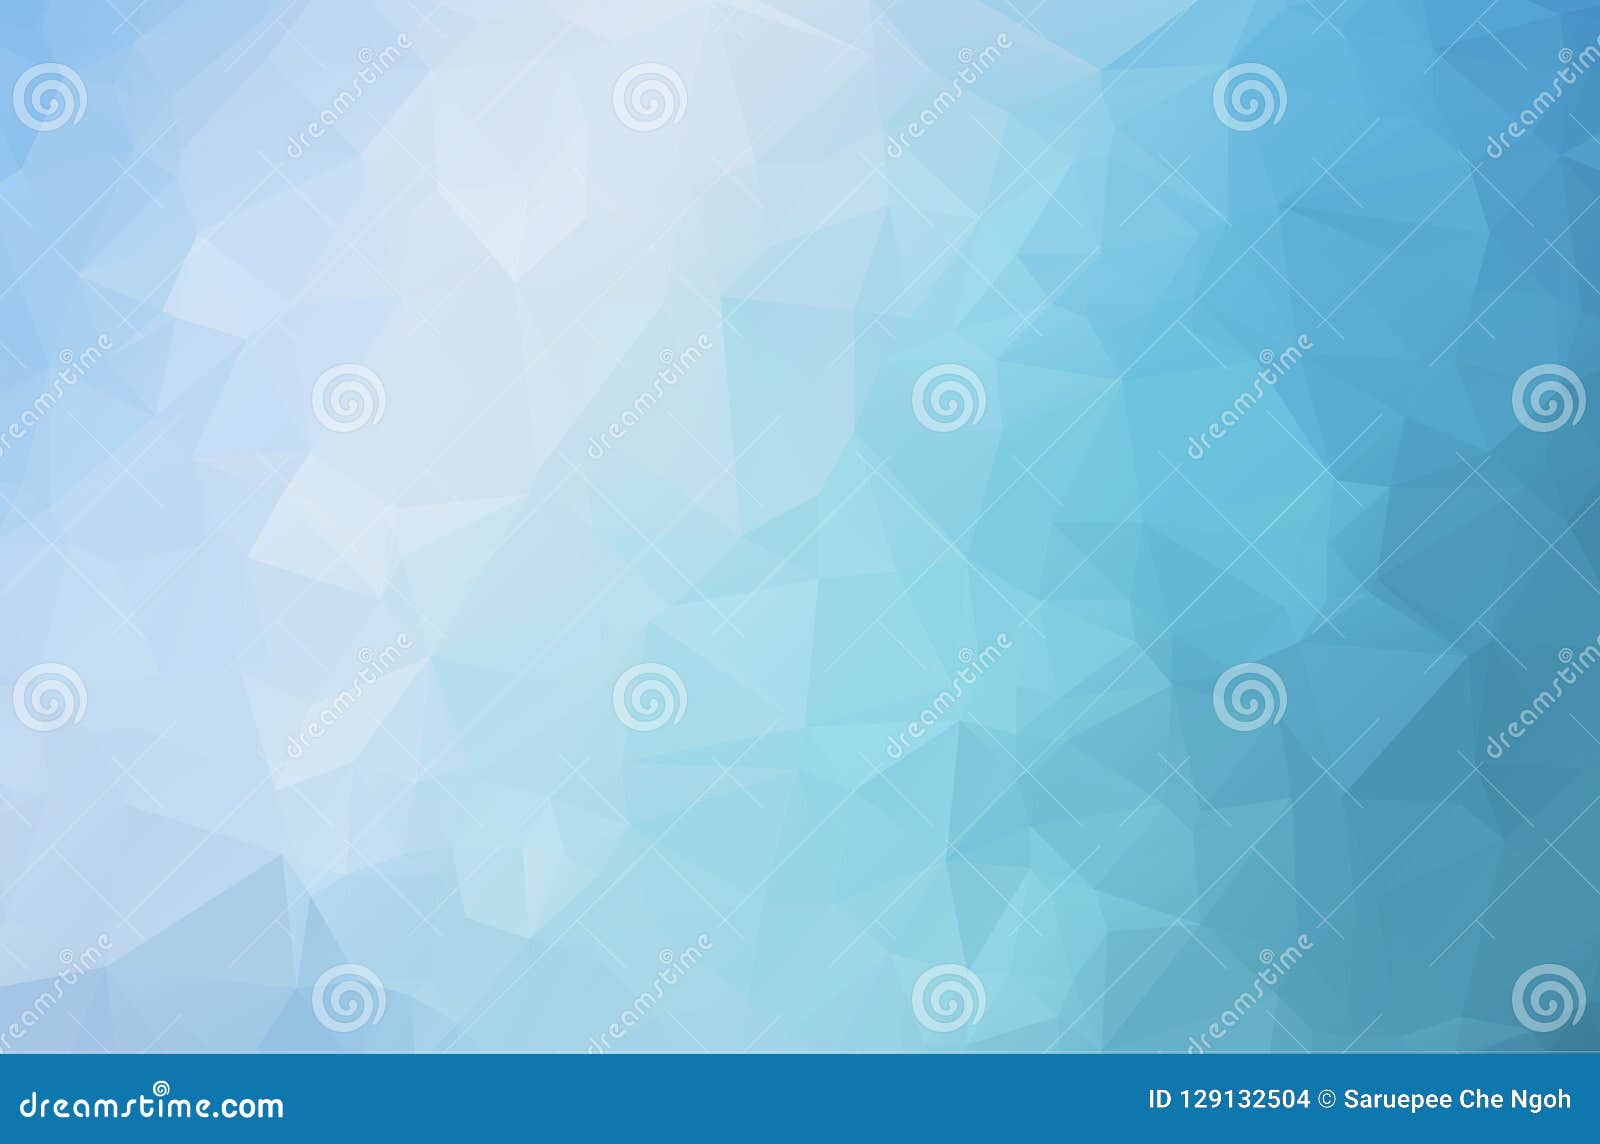 ocean blue polygon abstract background . abstract dark triangle mosaic background. creative geometric  in origam